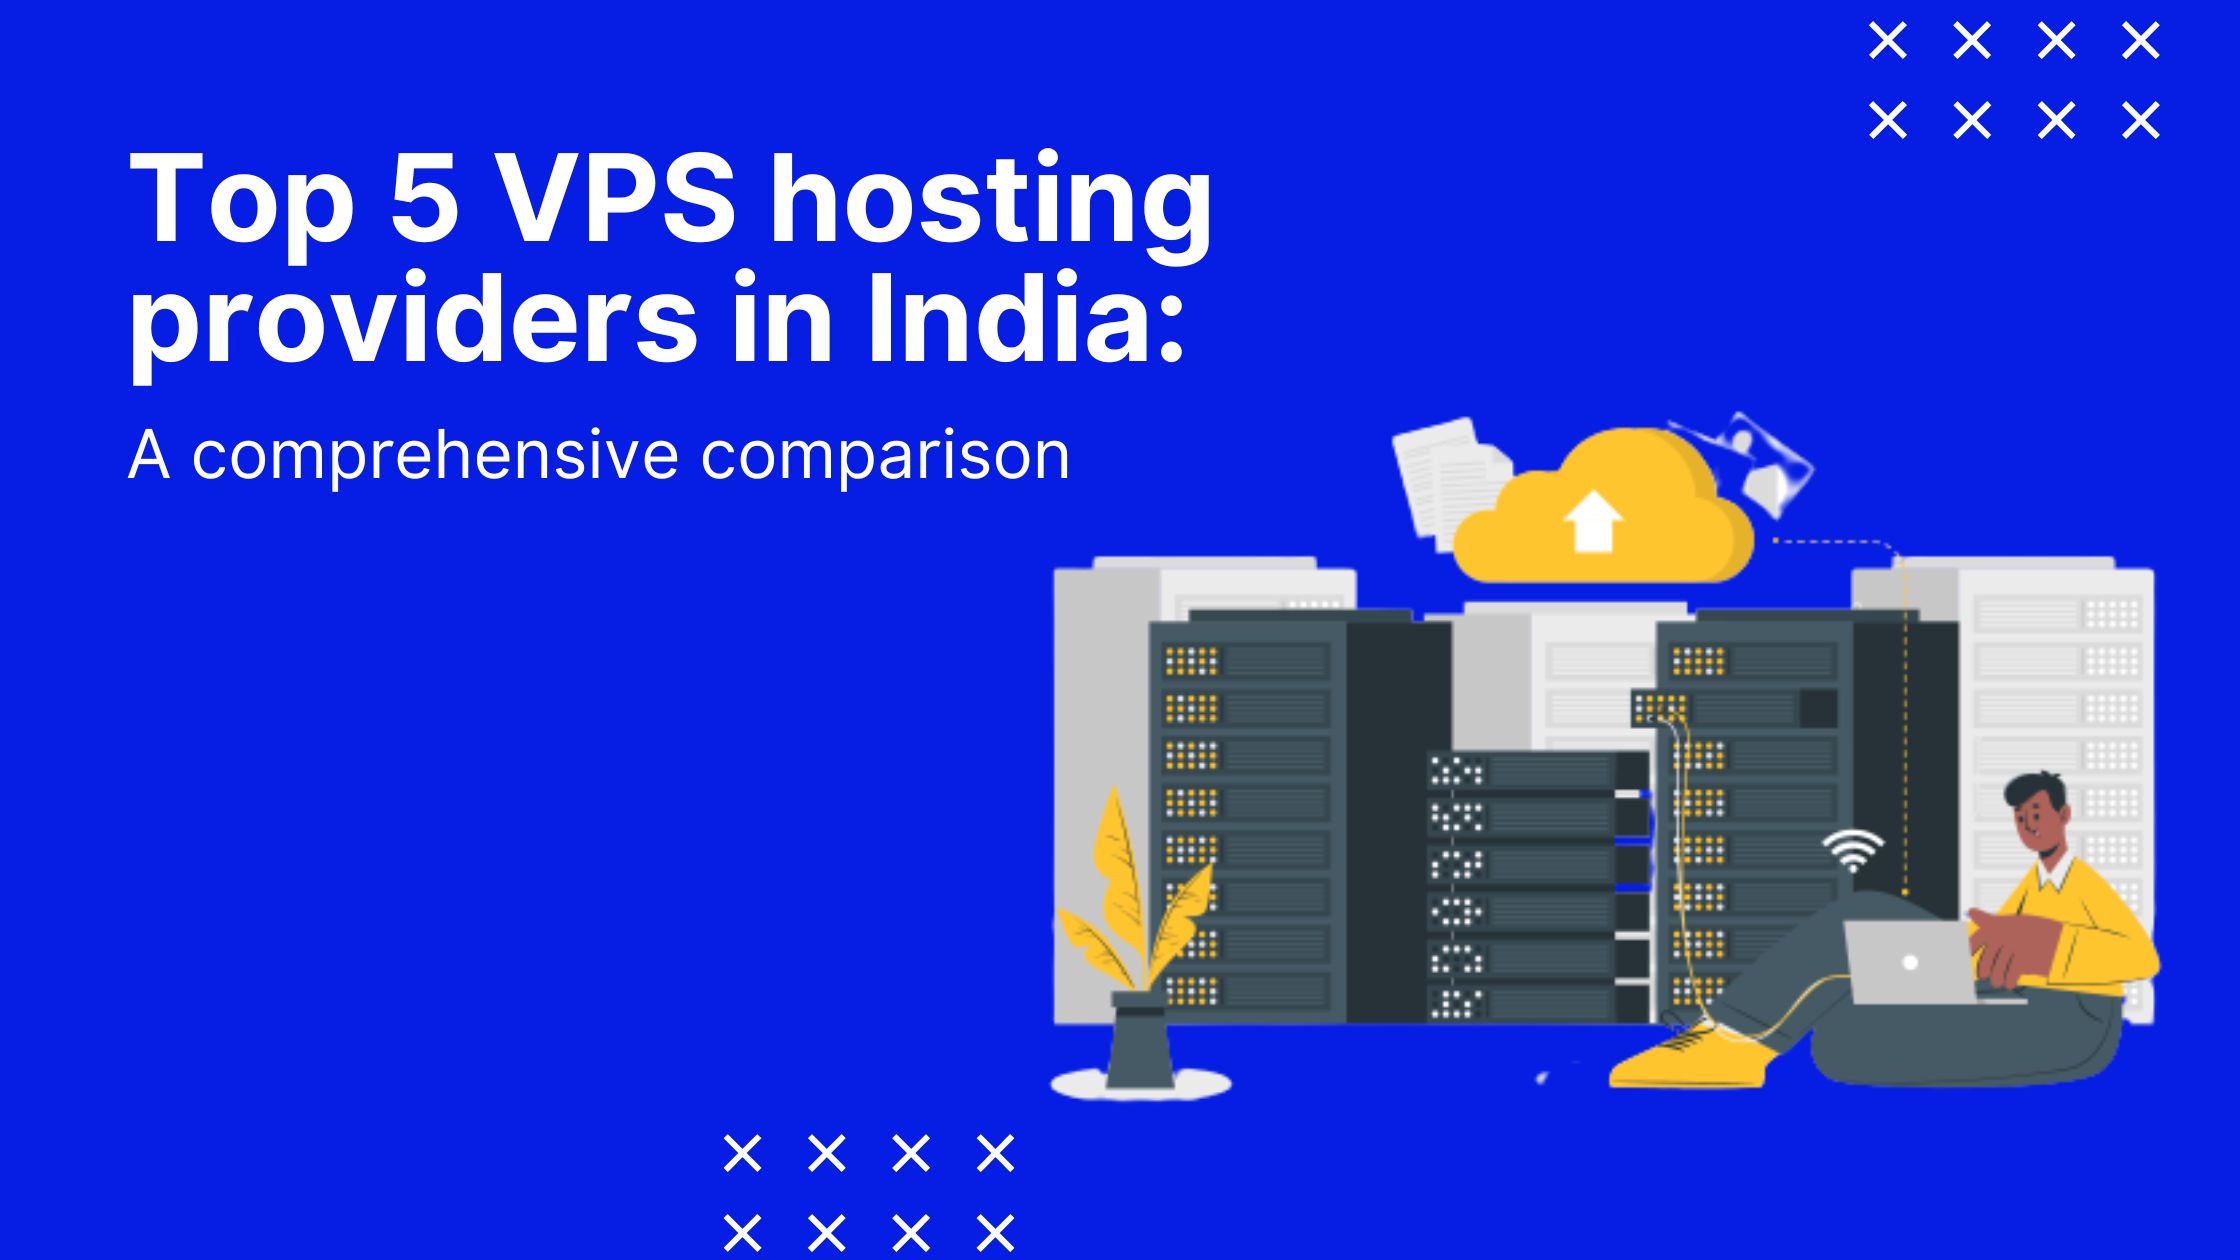 Top 5 VPS hosting providers in India A comprehensive comparison